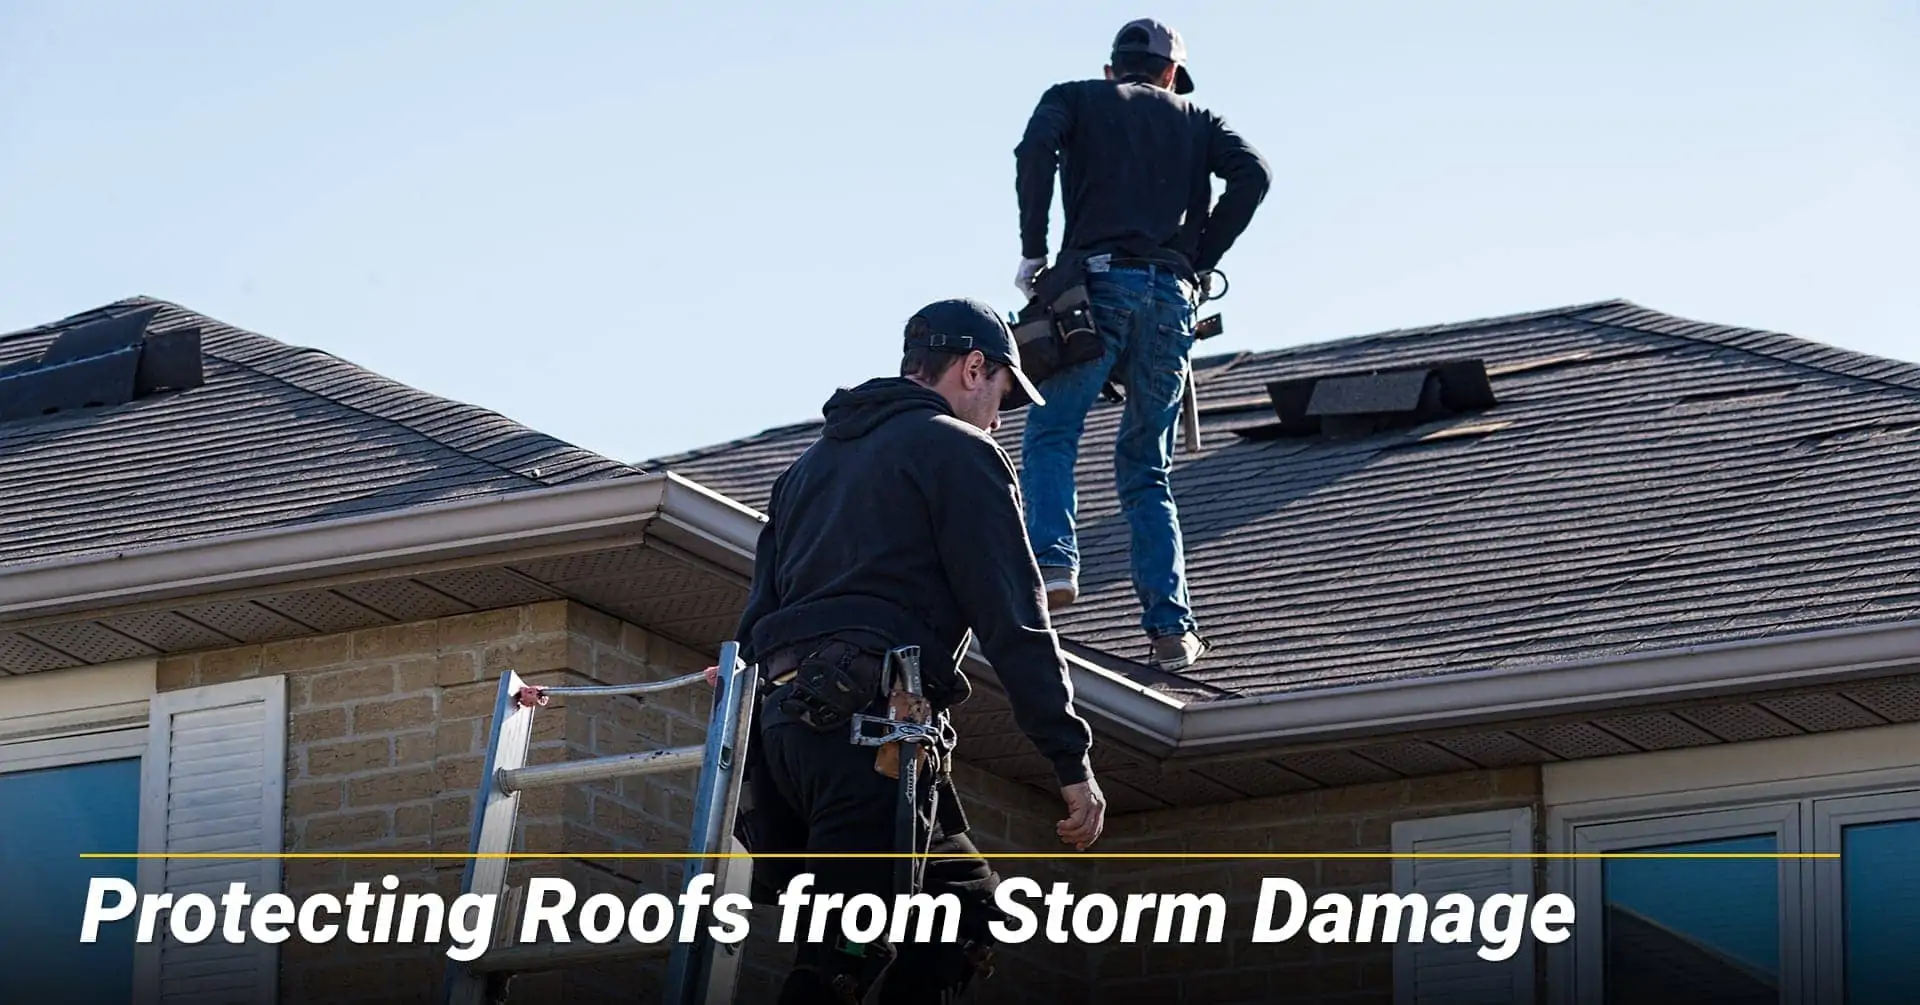 Protecting Roofs from Storm Damage, protect your roof